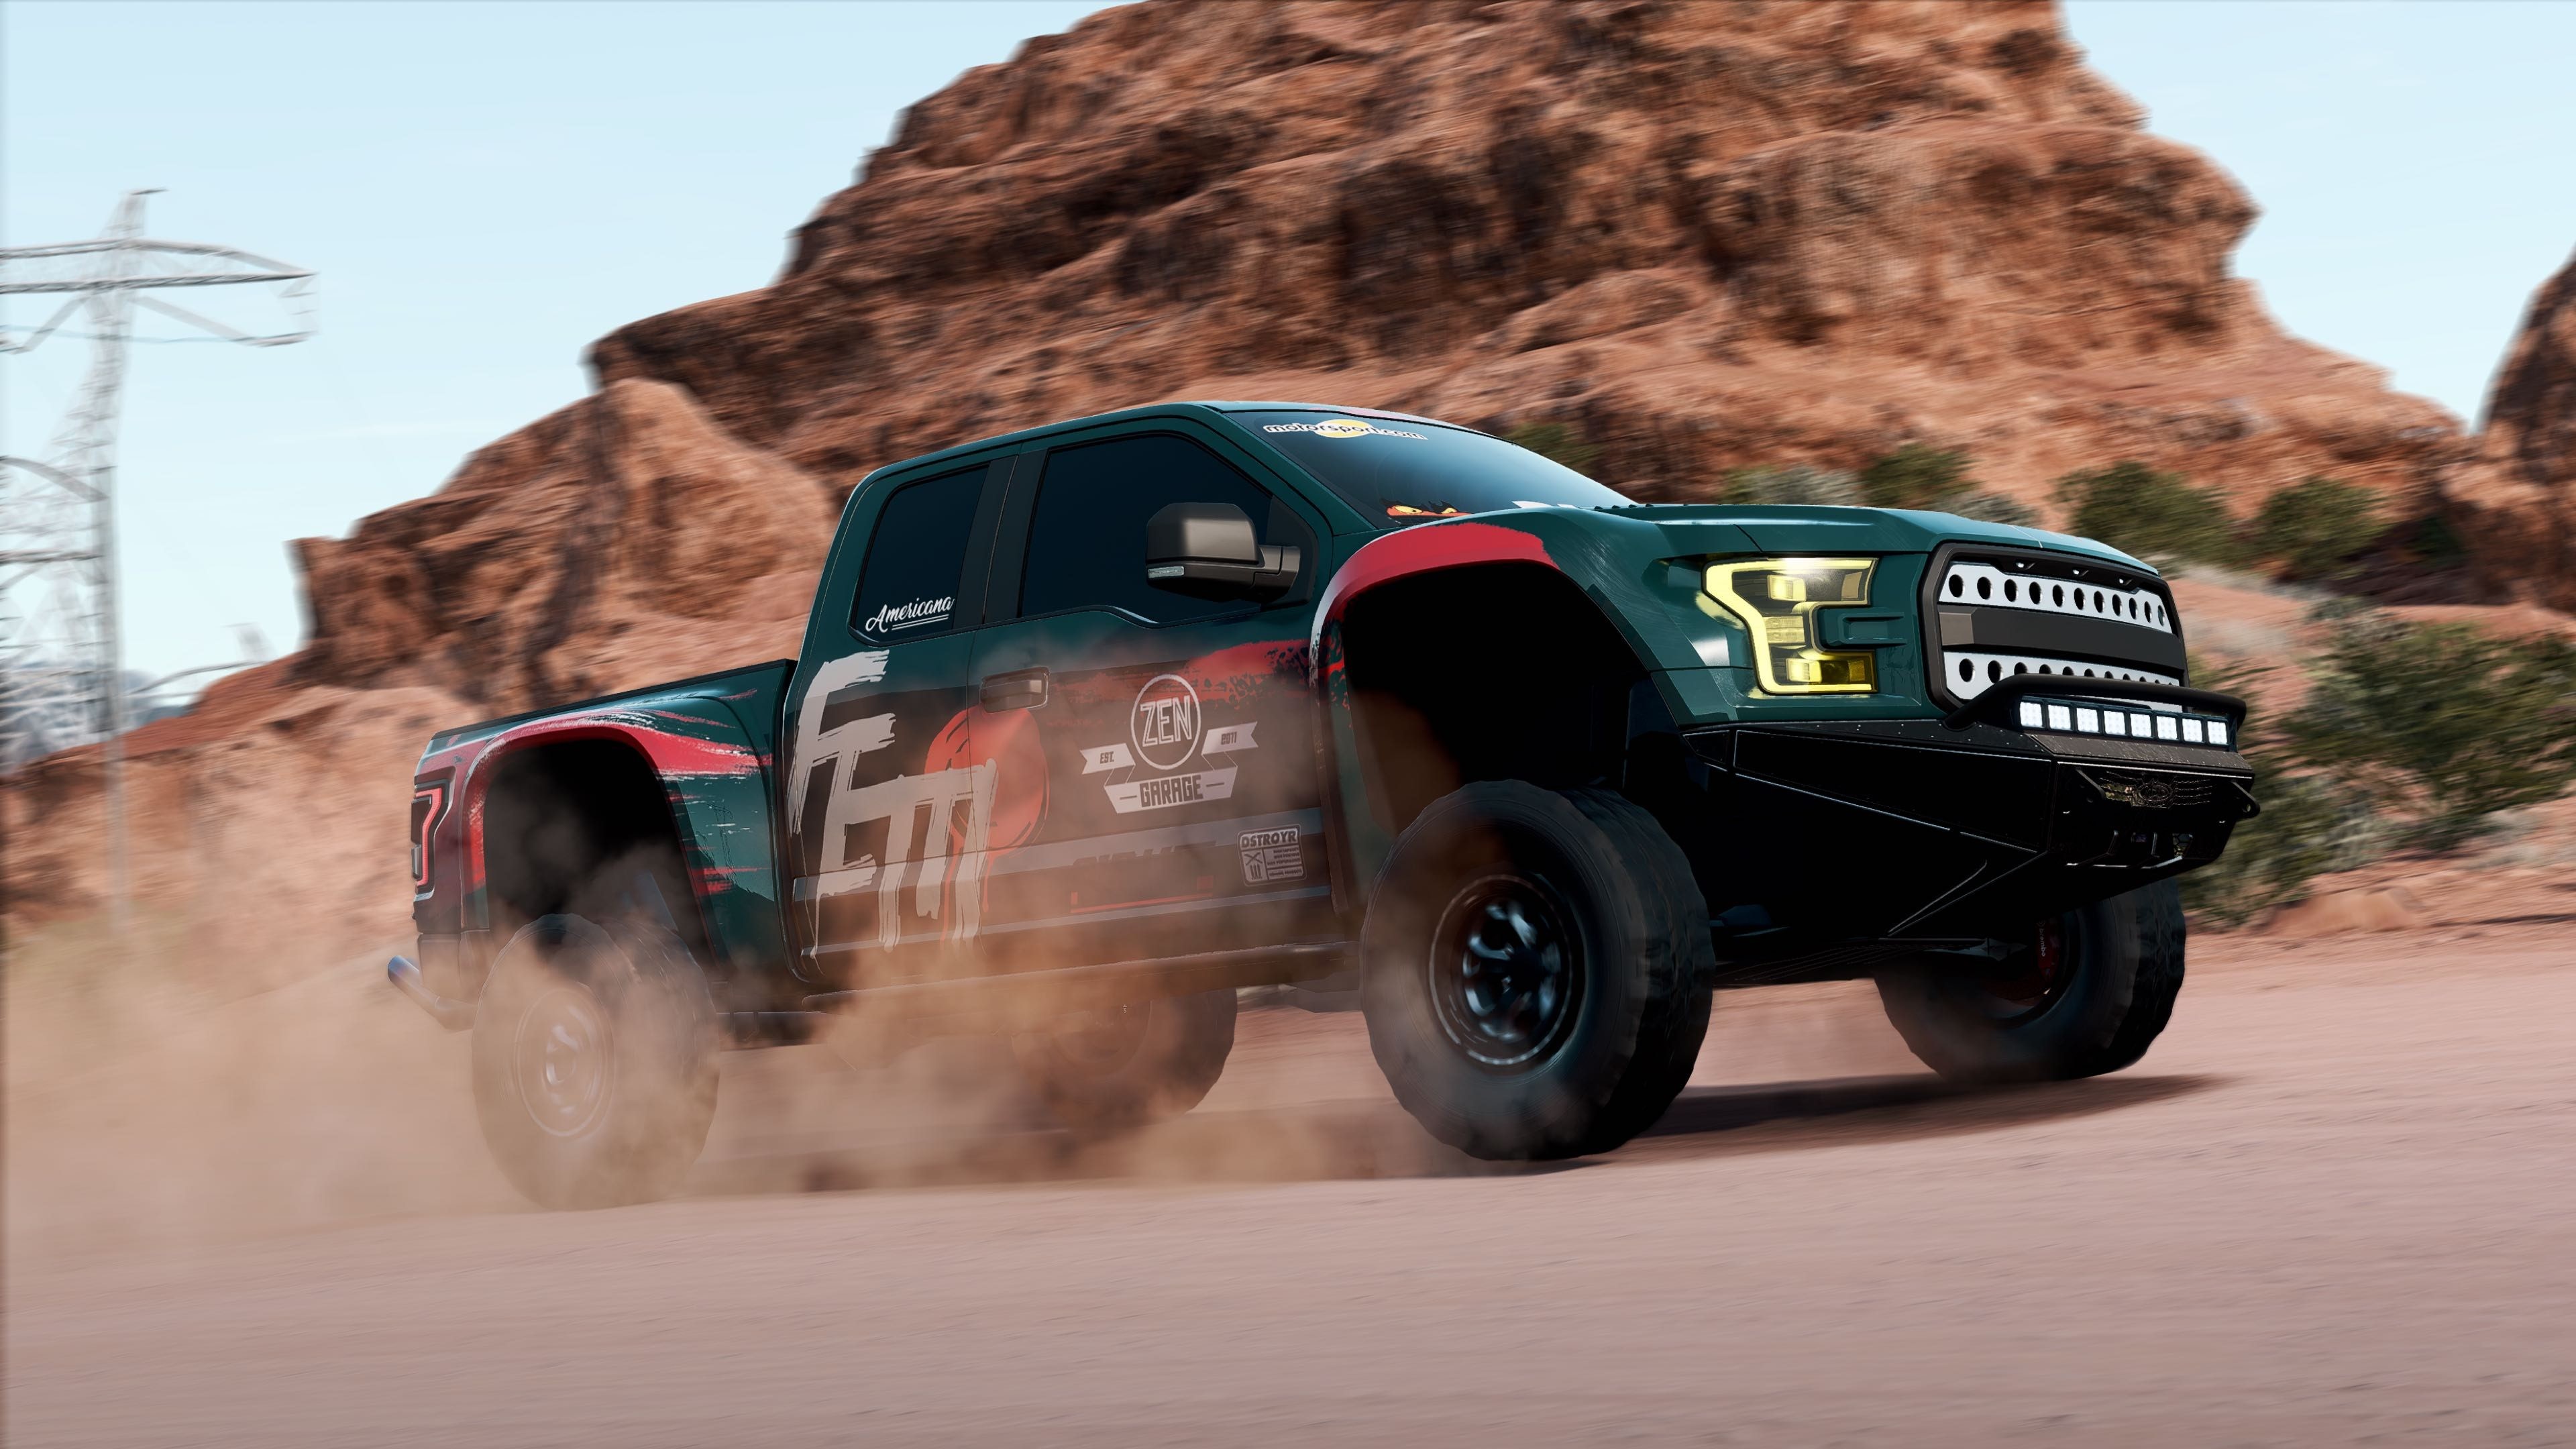 Тачка босс. Ford f150 NFS Payback. Ford f150 Raptor NFS Payback. Армия Эмбера need for Speed Payback. Фейт Джонс NFS Payback.